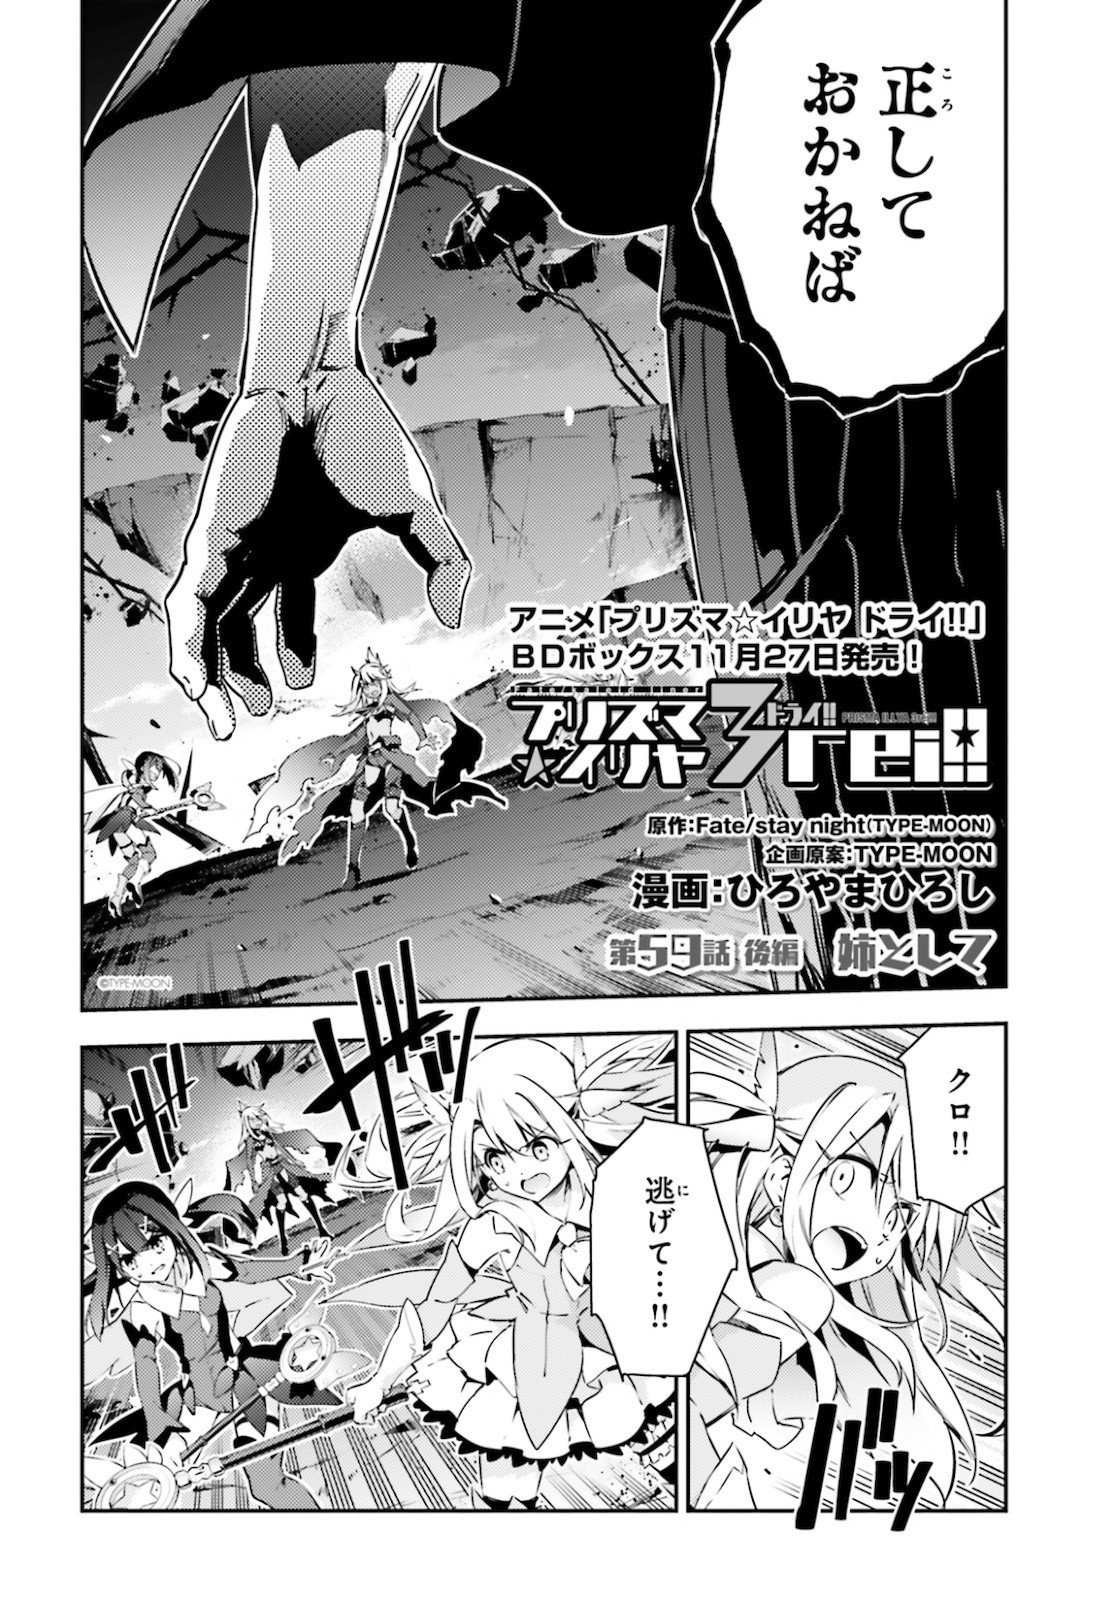 Fate/Kaleid Liner Prisma Illya Drei! - Chapter 59-2 - Page 2